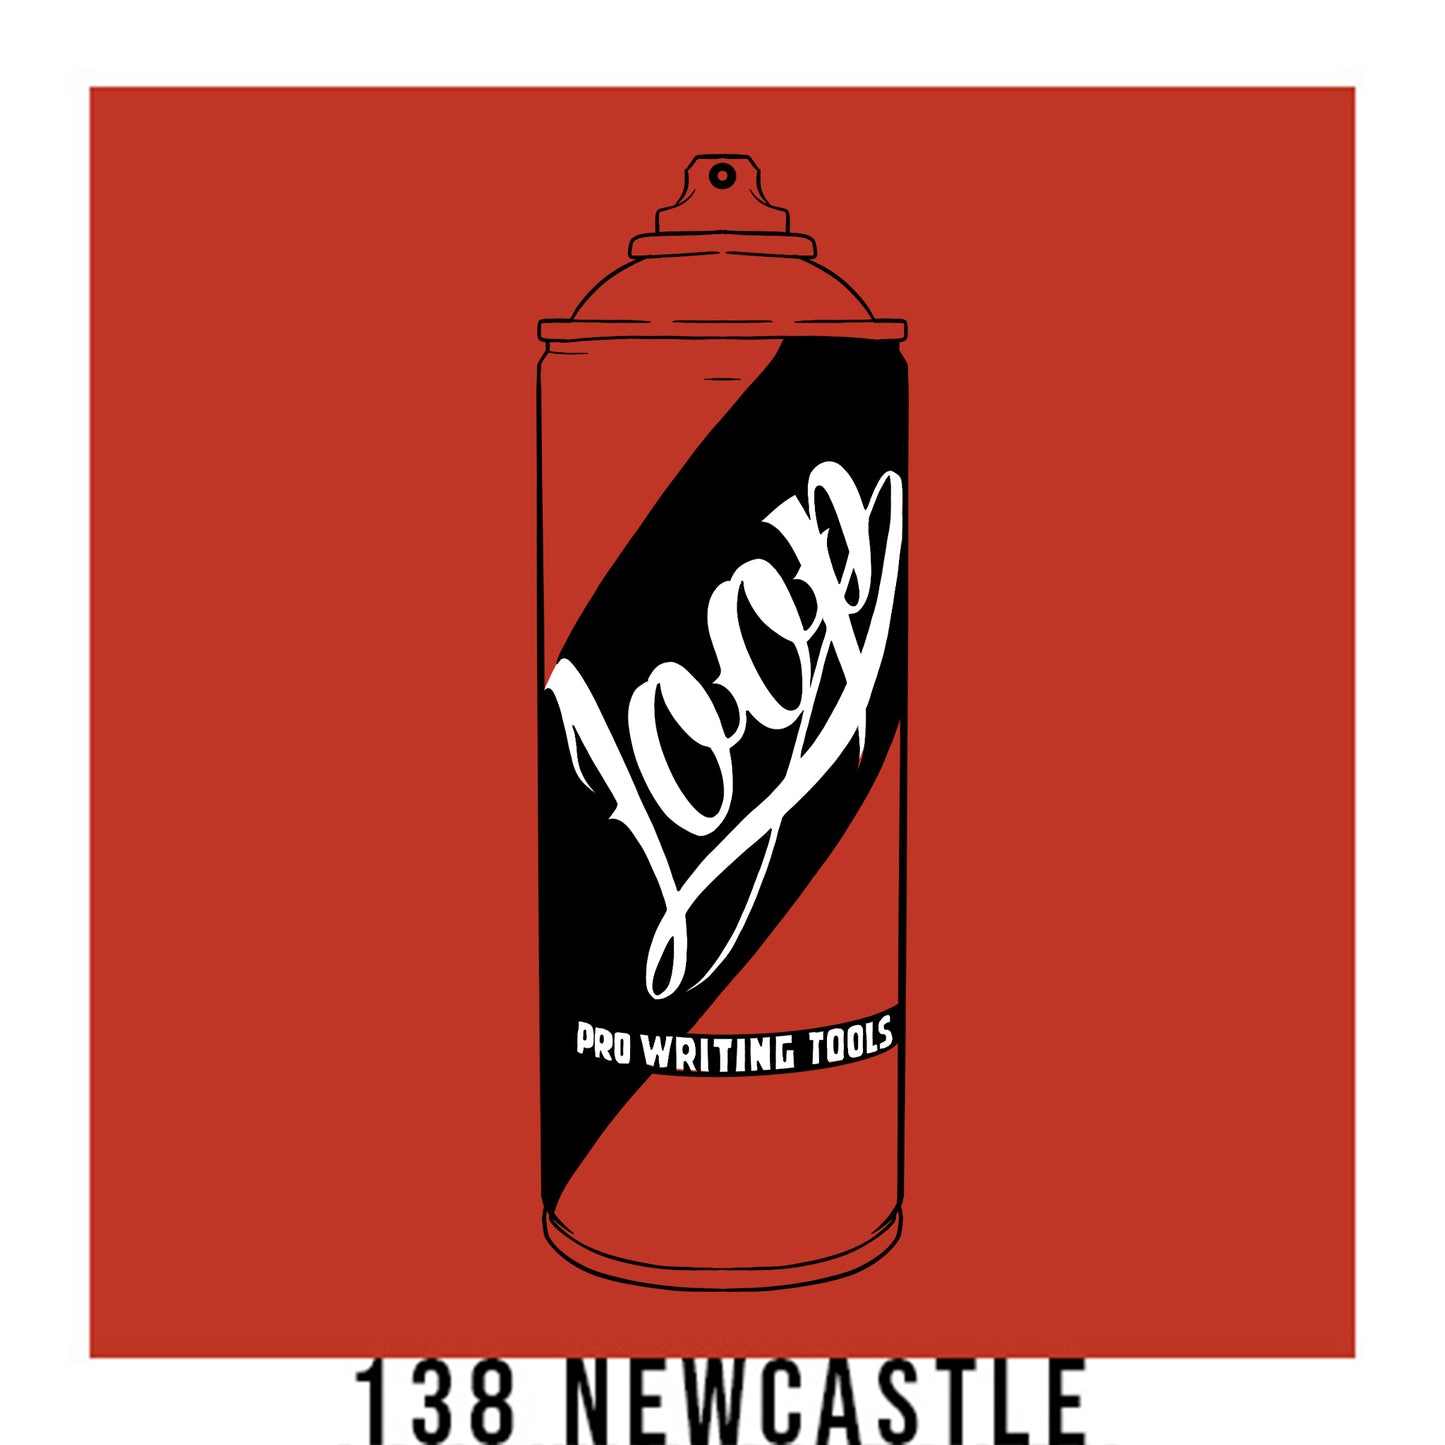 A black outline drawing of a bright red orange spray paint can with the word "Loop" written on the face in script. The background is a color swatch of the same bright red orange with a white border with the words "138 newcastle" at the bottom.